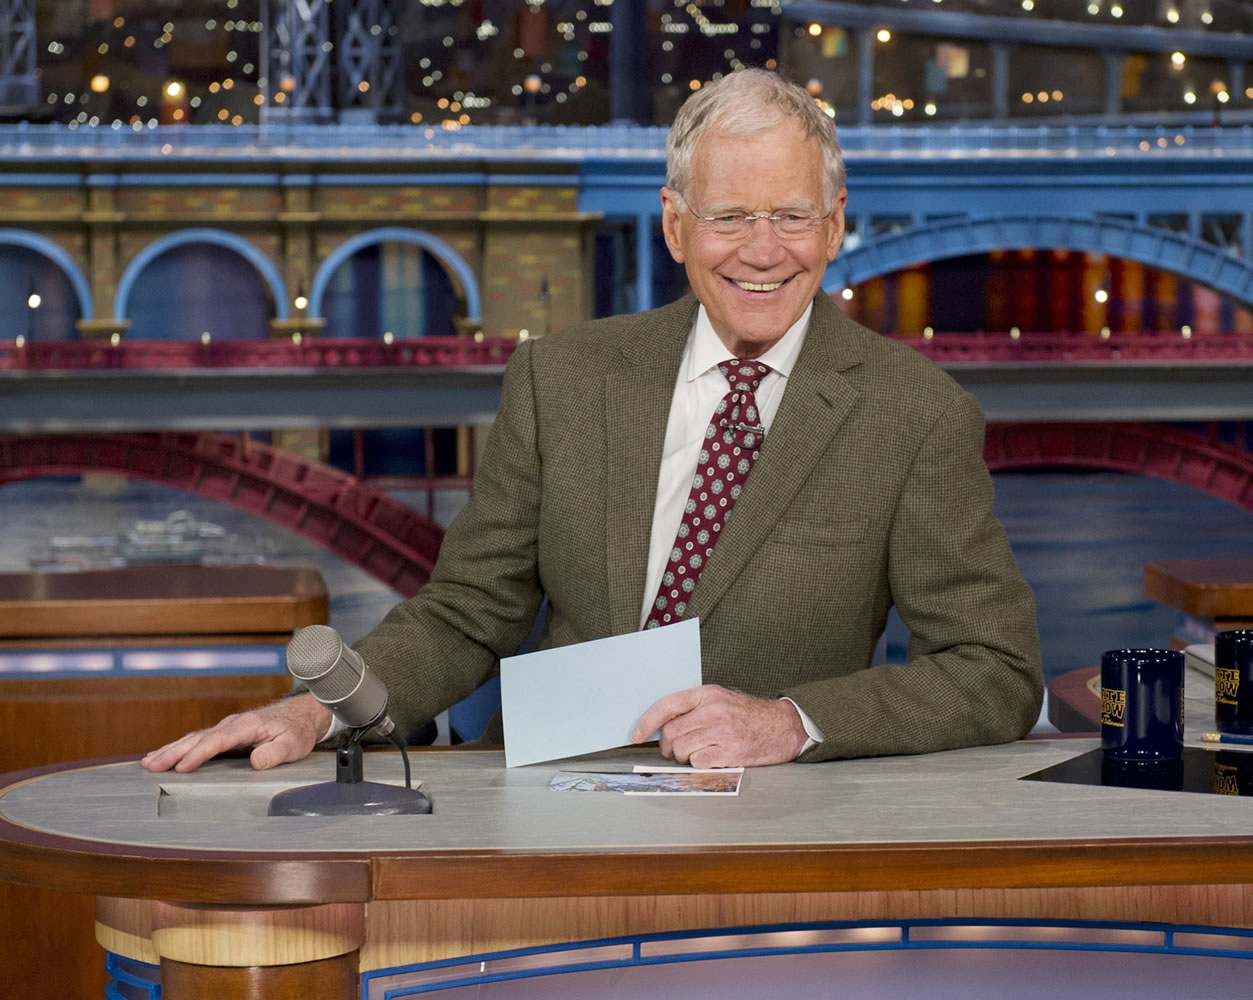 David Letterman, host of the &quot;Late Show with David Letterman,&quot; is seated at his desk April 3 in New York.